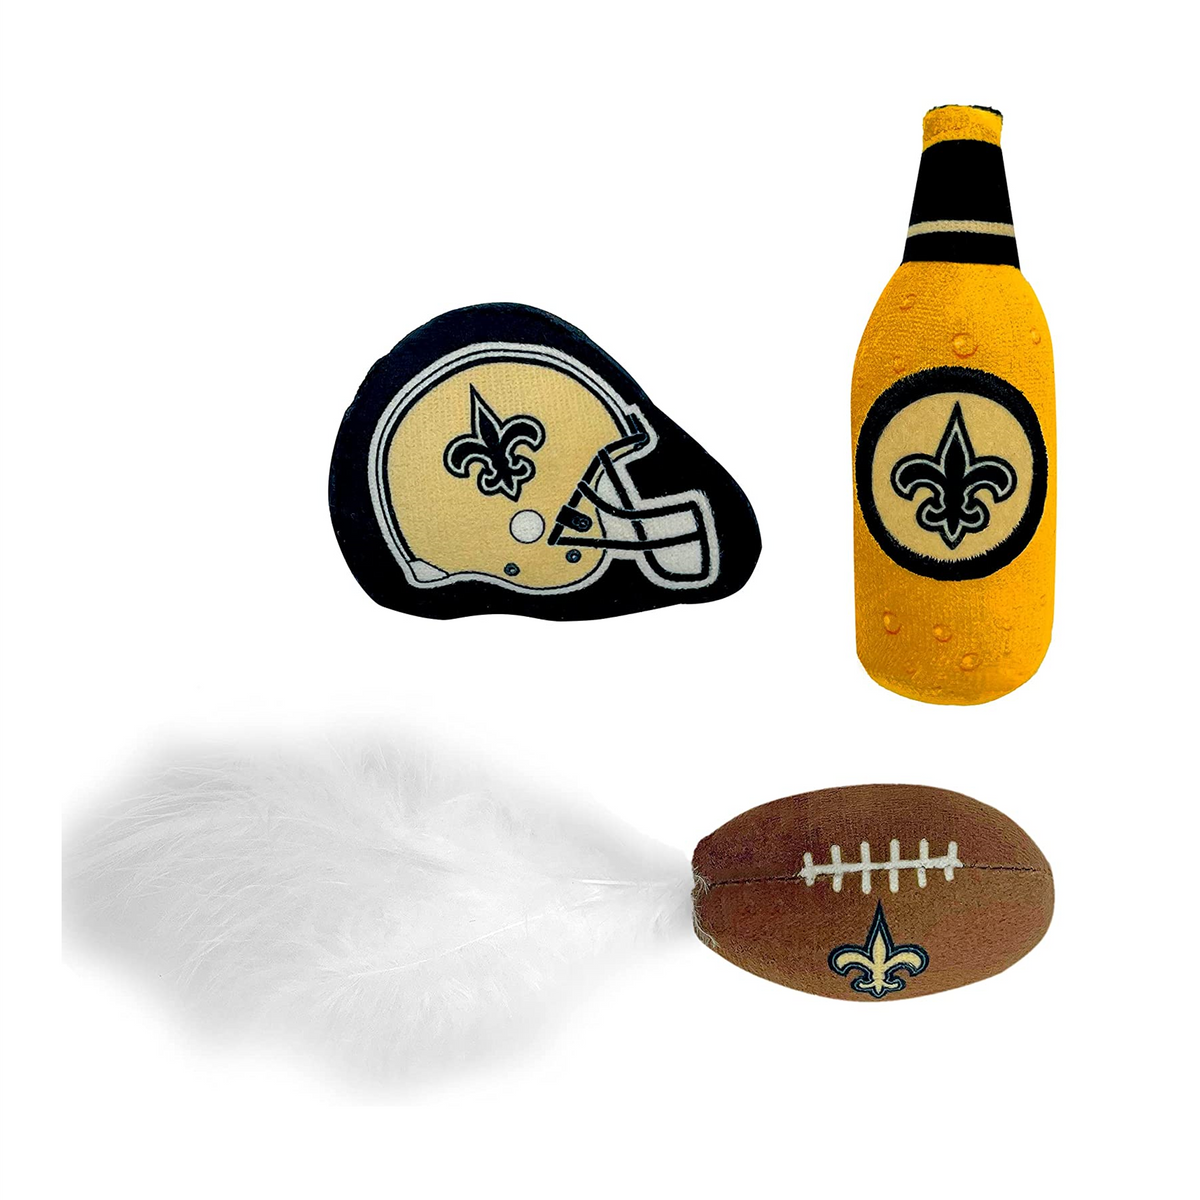 New Orleans Saints 3 piece Catnip Toy Set - 3 Red Rovers